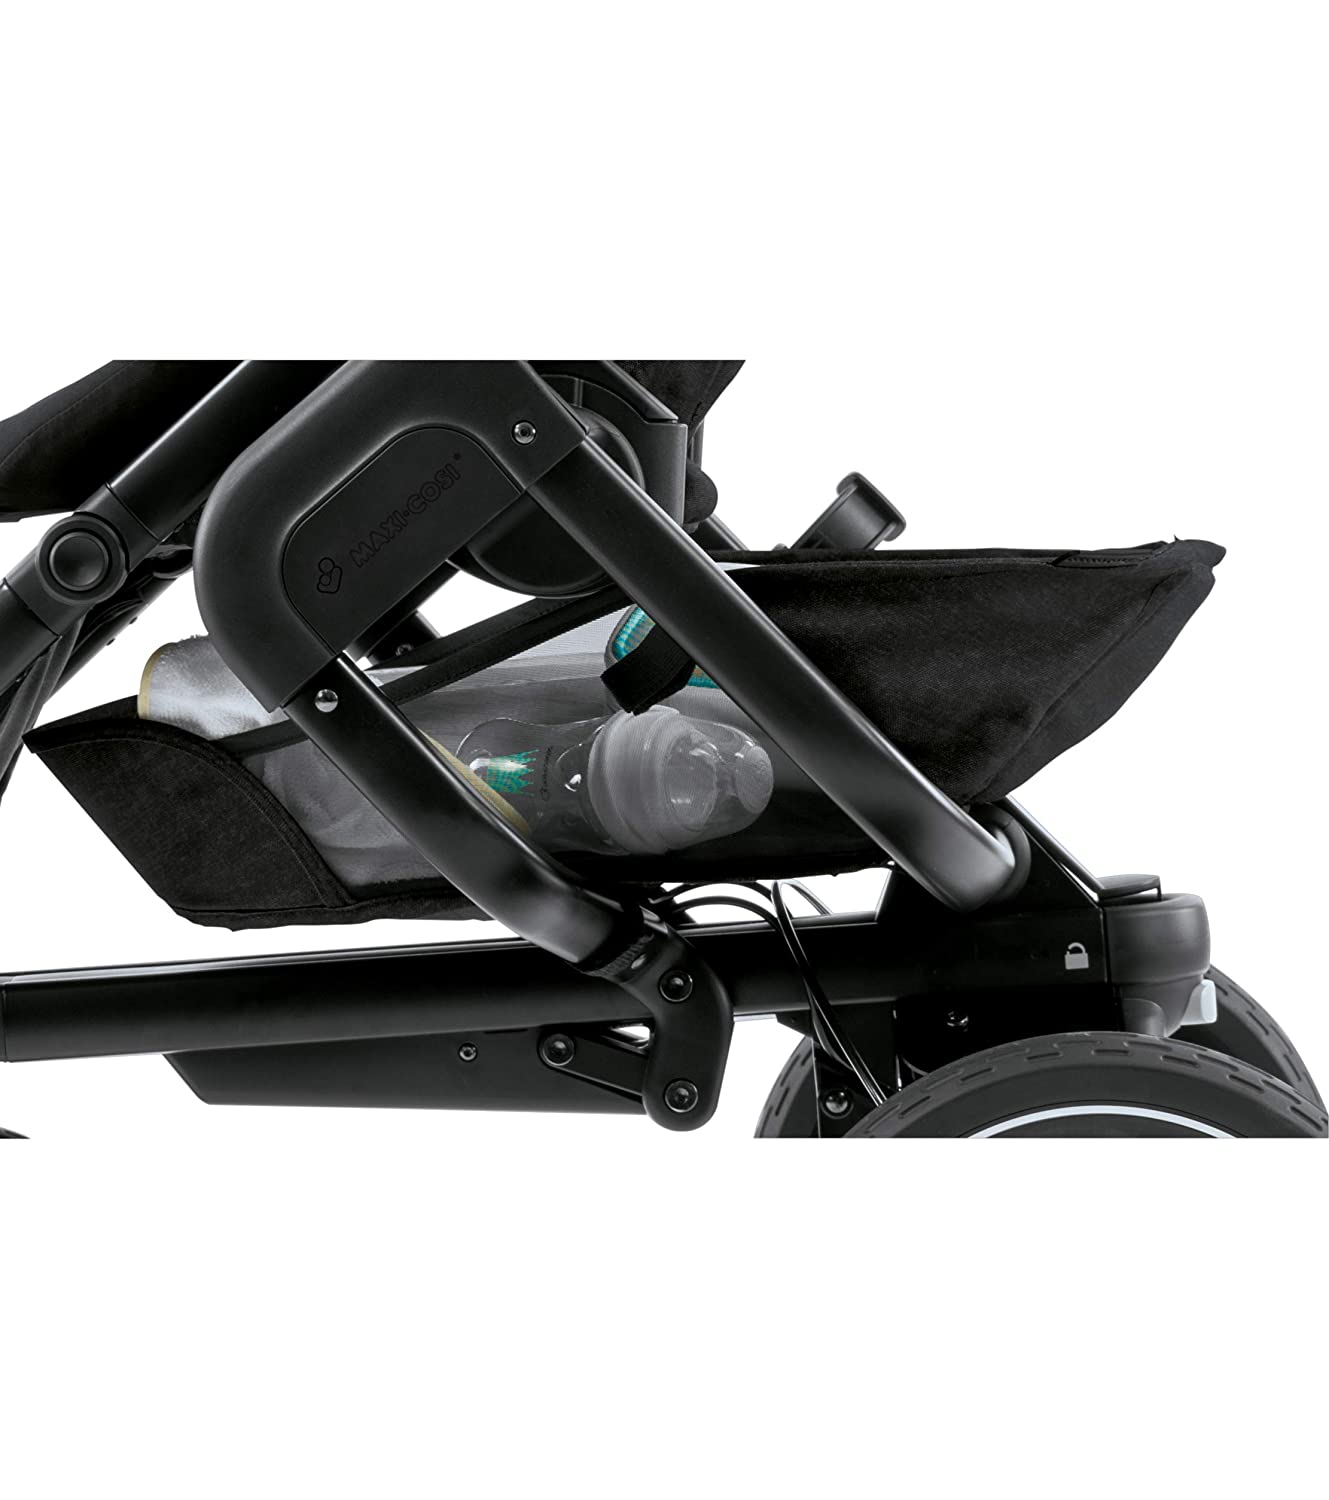 Maxi-Cosi Nova Combi-Pushchair Can Be Used From Birth to Approx. 3.5 Years, Comfortable Outdoor/Off-Road Pushchair 3 wheels